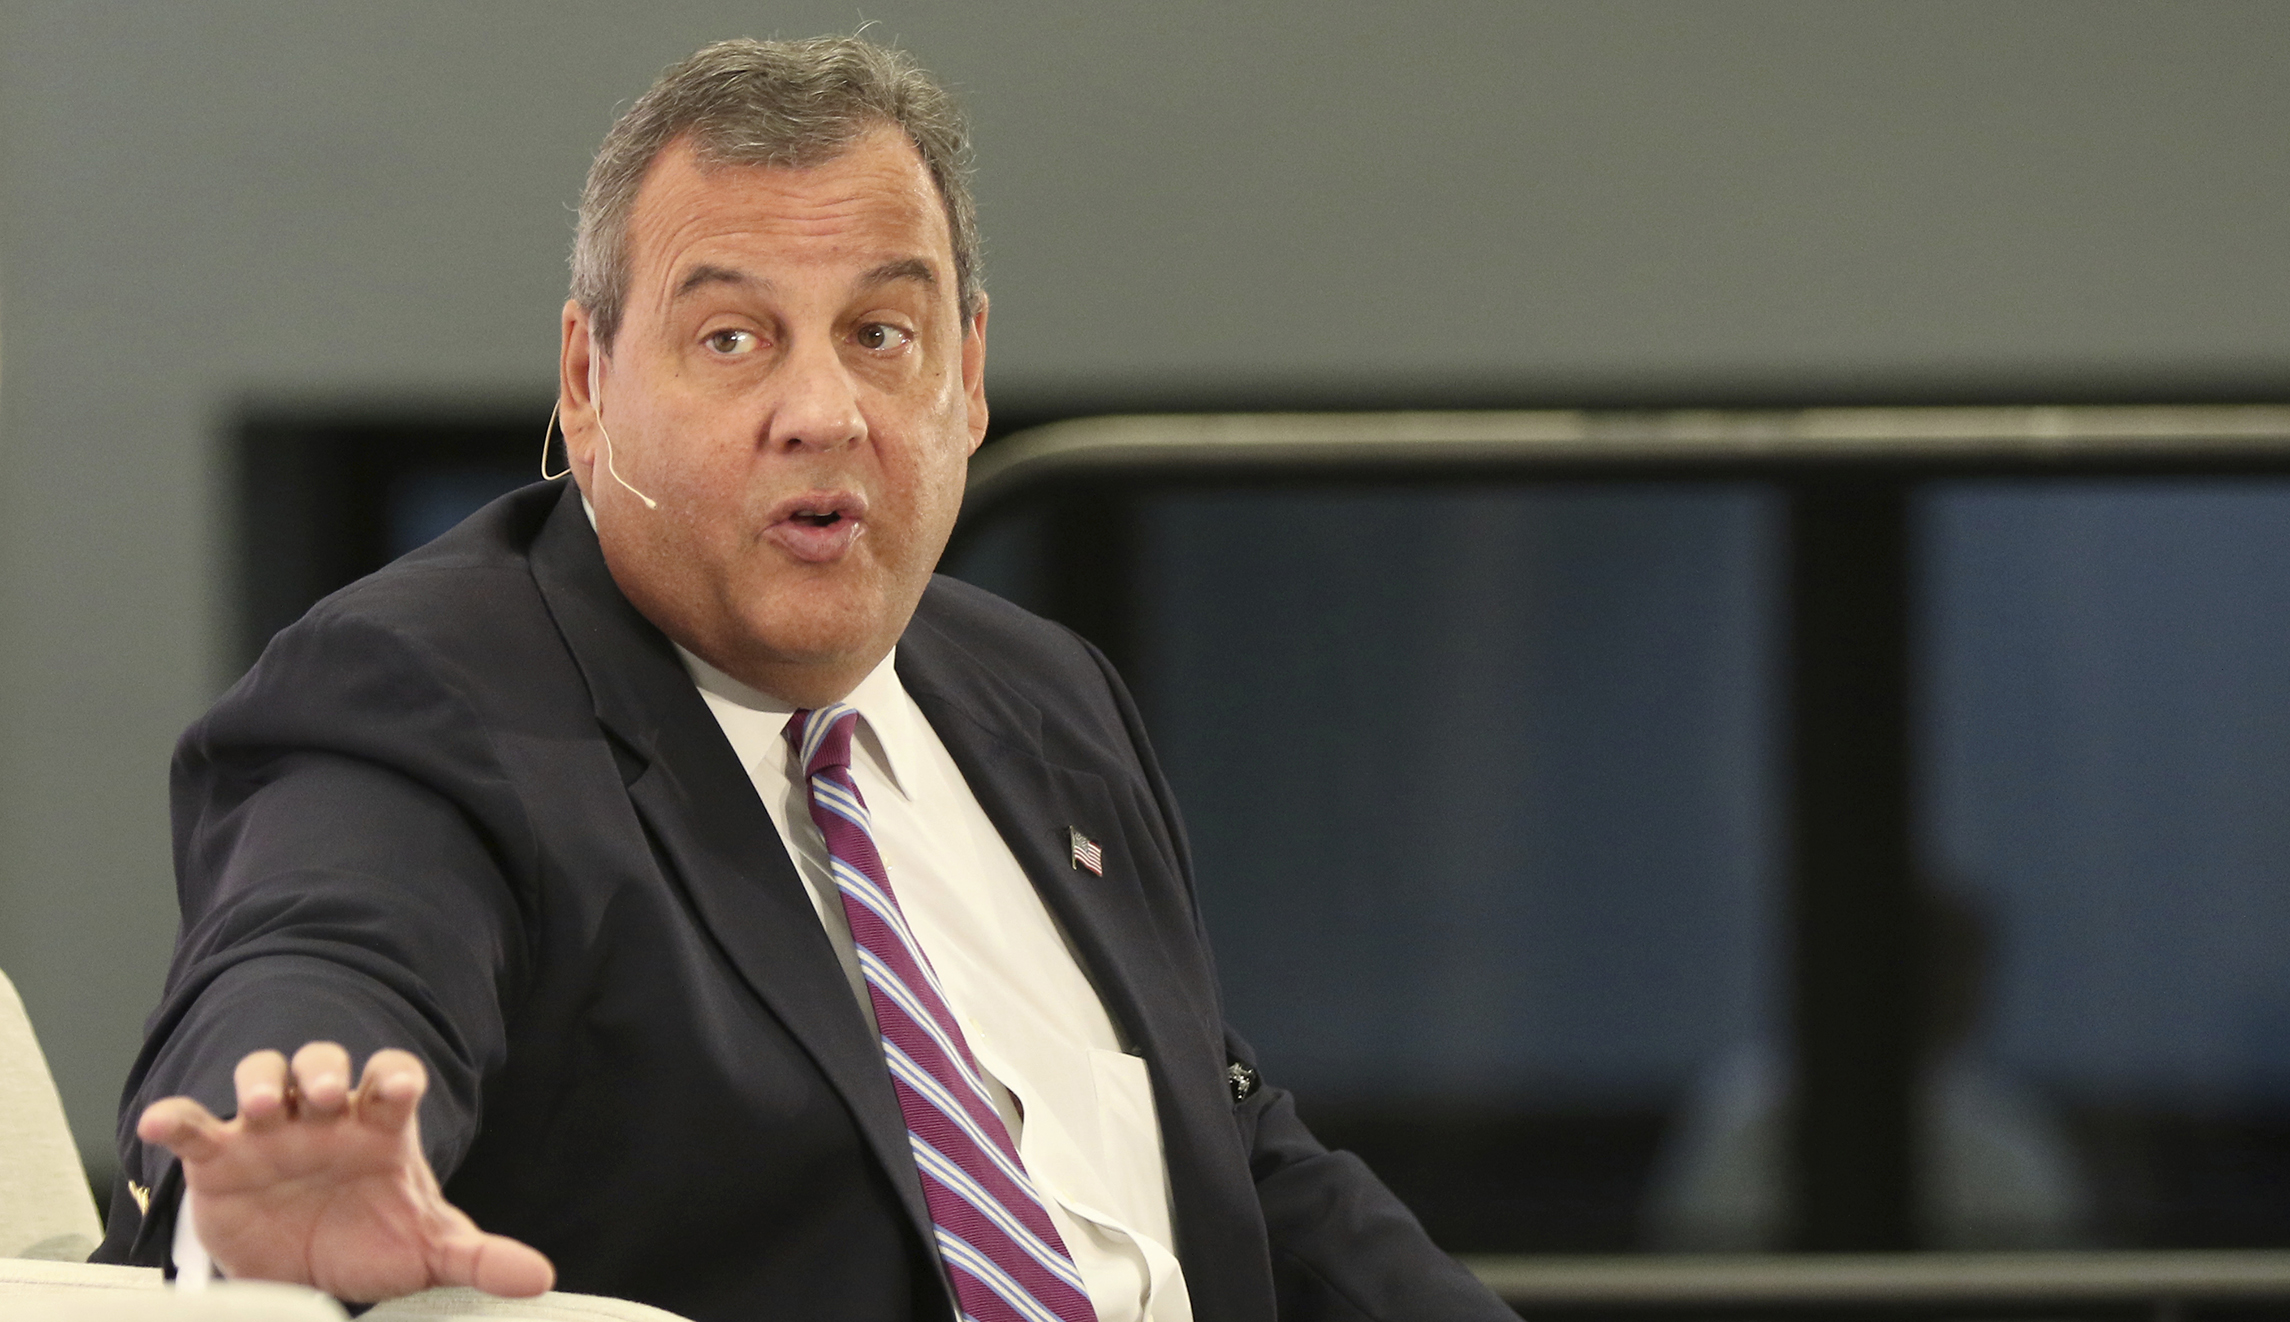 Chris Christie's niece charged with attacking cops in violent plane meltdown
